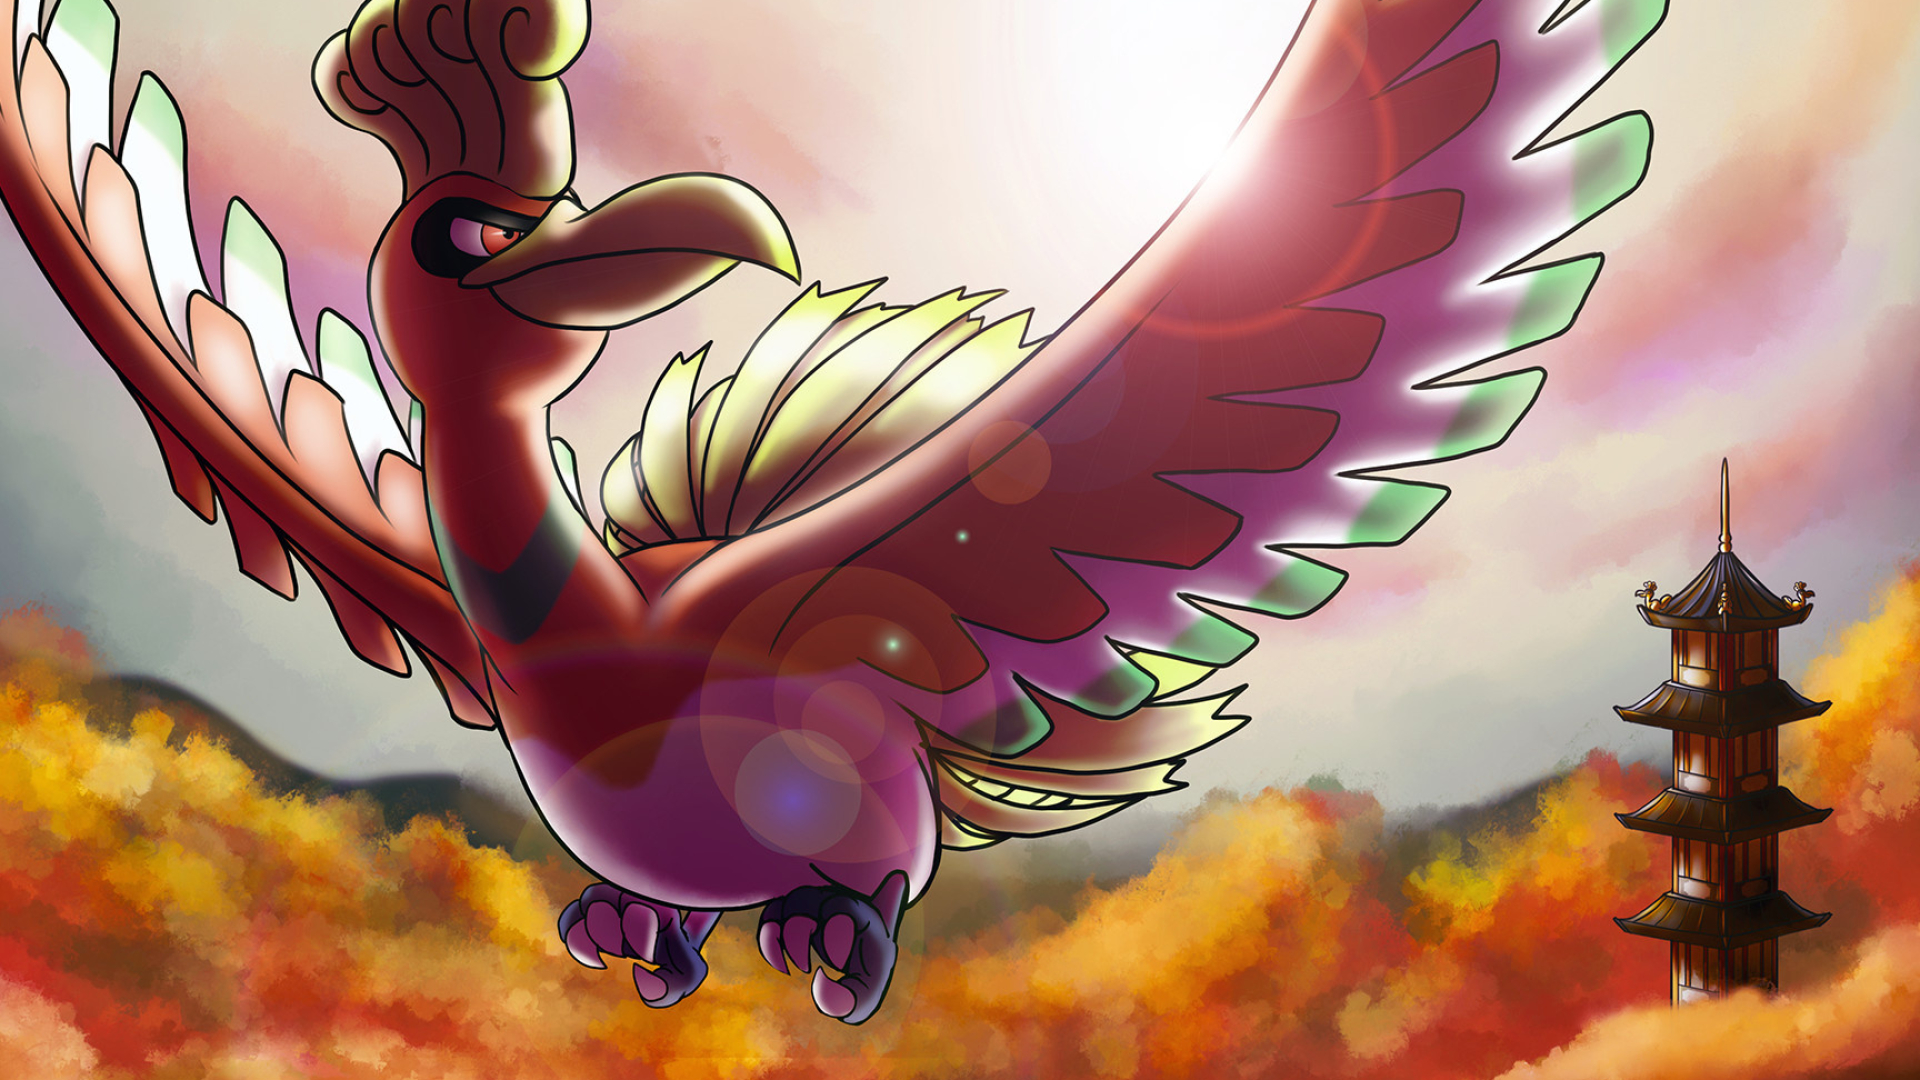 Ho-Oh and the Tin Tower, Ho-Oh Wallpaper, 1920x1080 Full HD Desktop